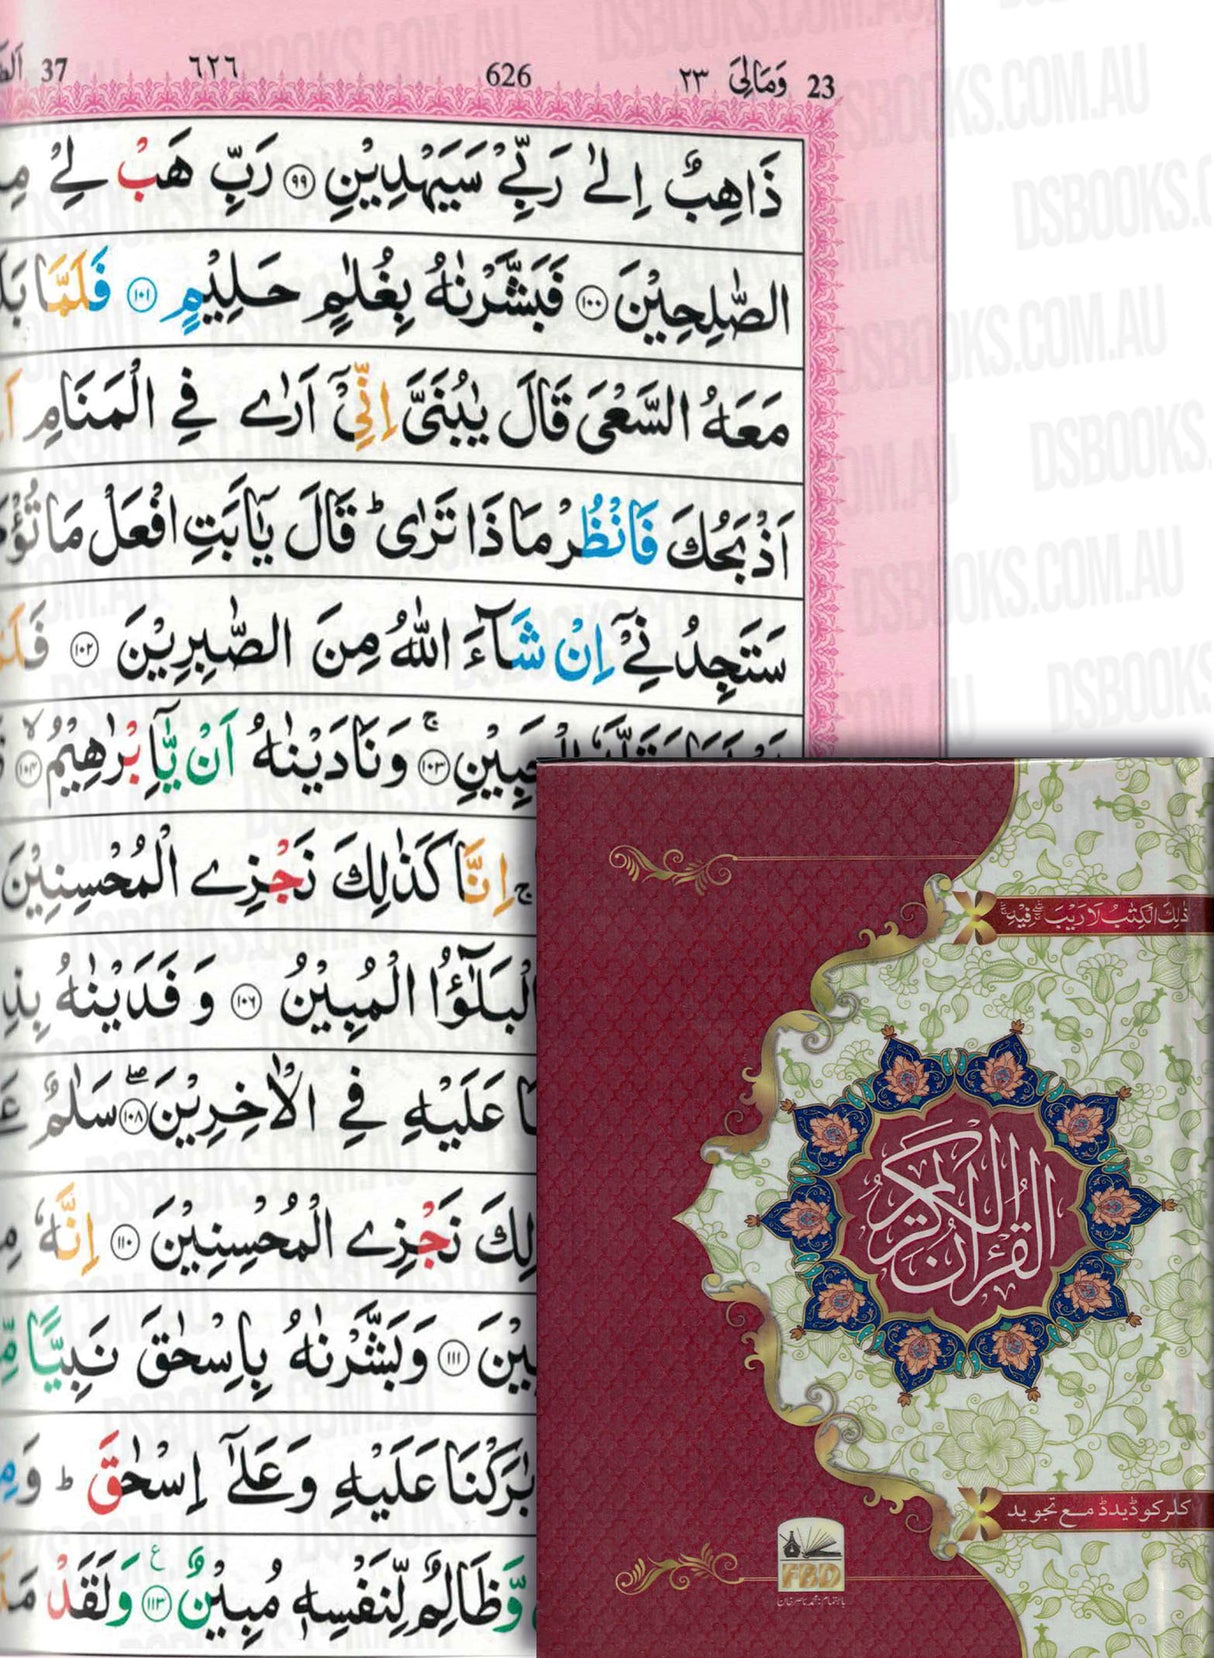 Colour Coded Tajweed Rules (13 Lines per page)(Indo/Pak script)